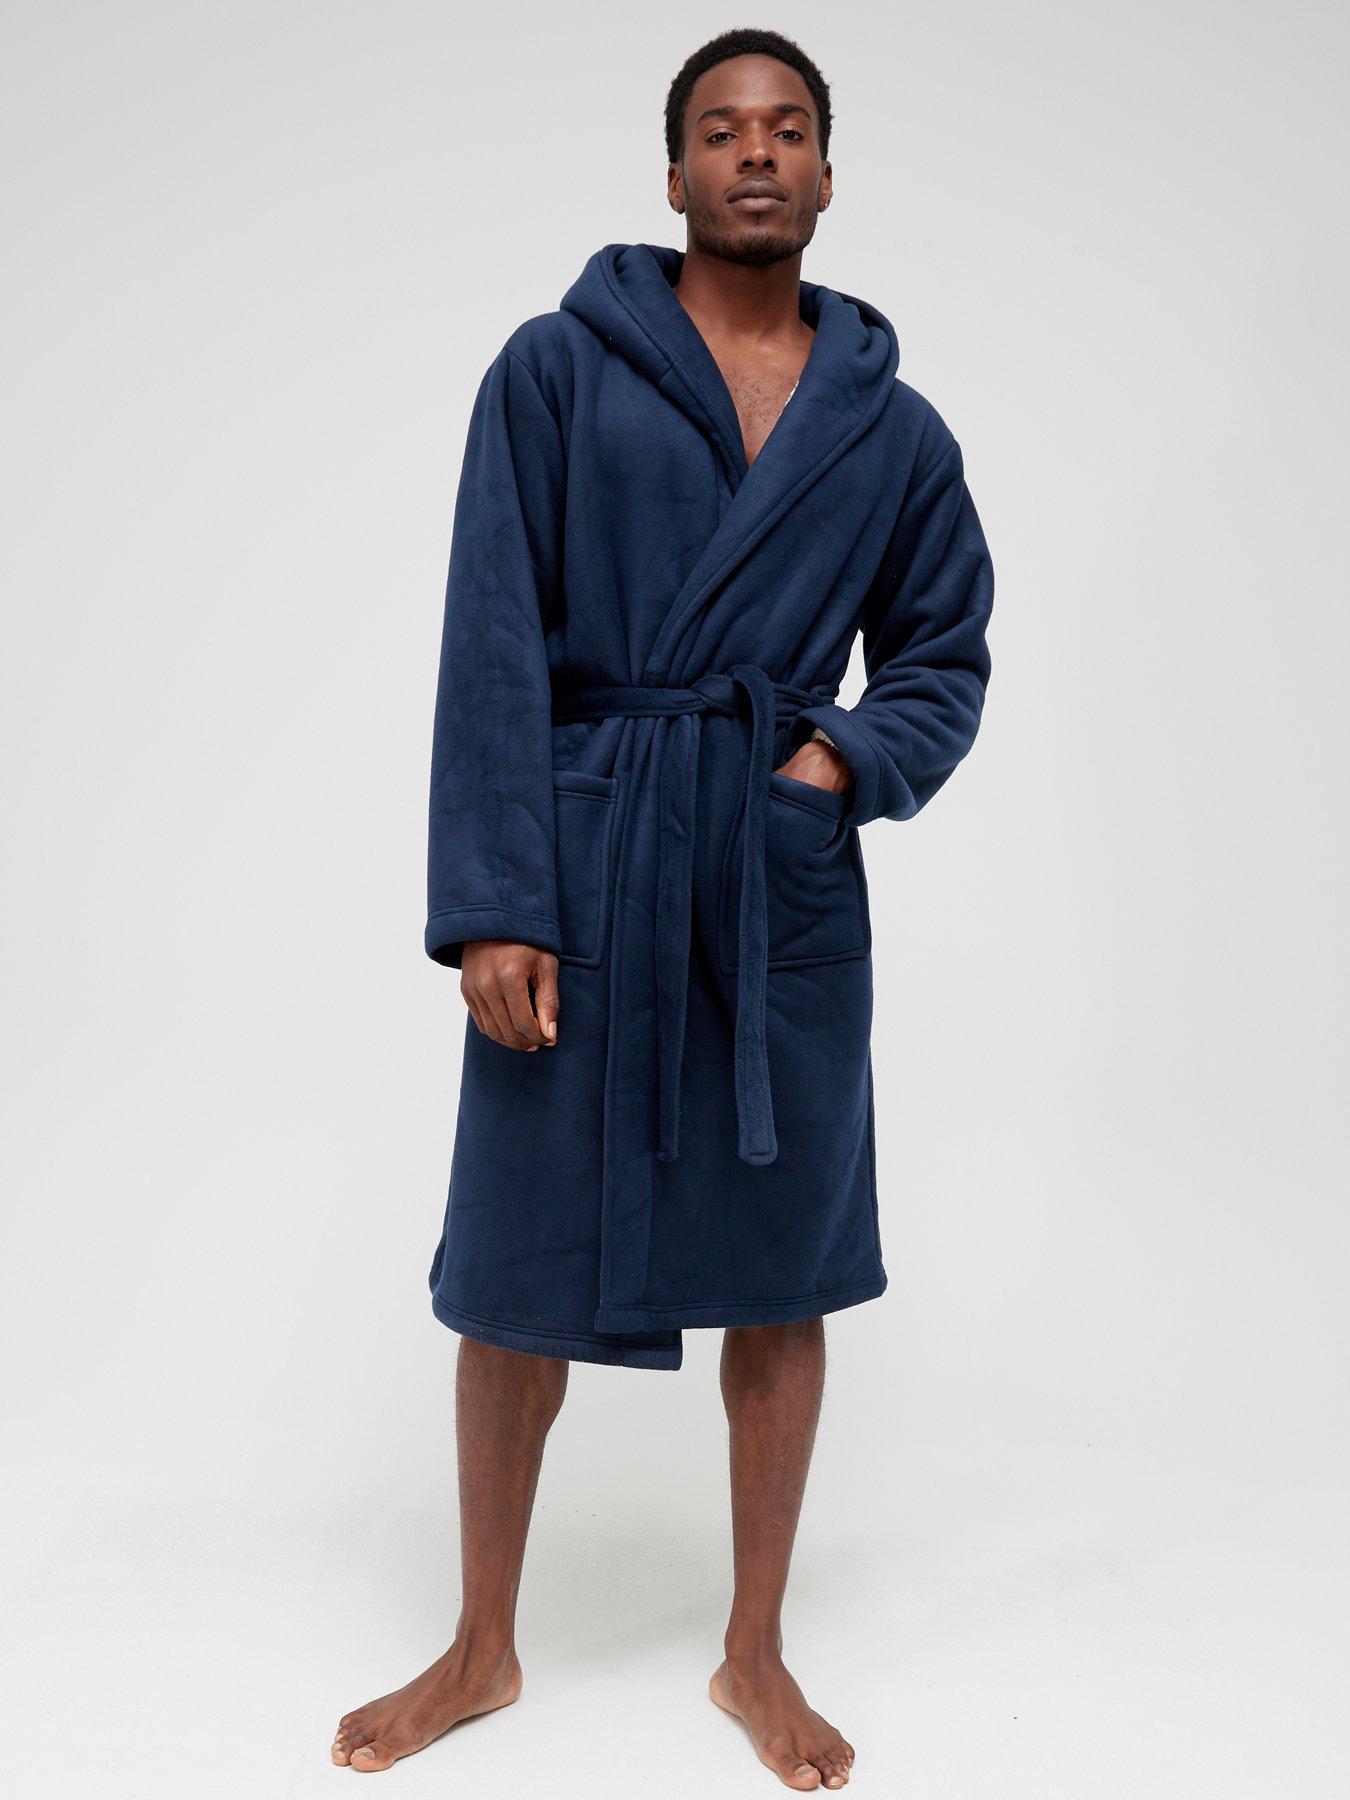 i-Smalls Mens Warm Stripe Pattern Fleece Hooded Robe Dressing Gown with Eye Mask 